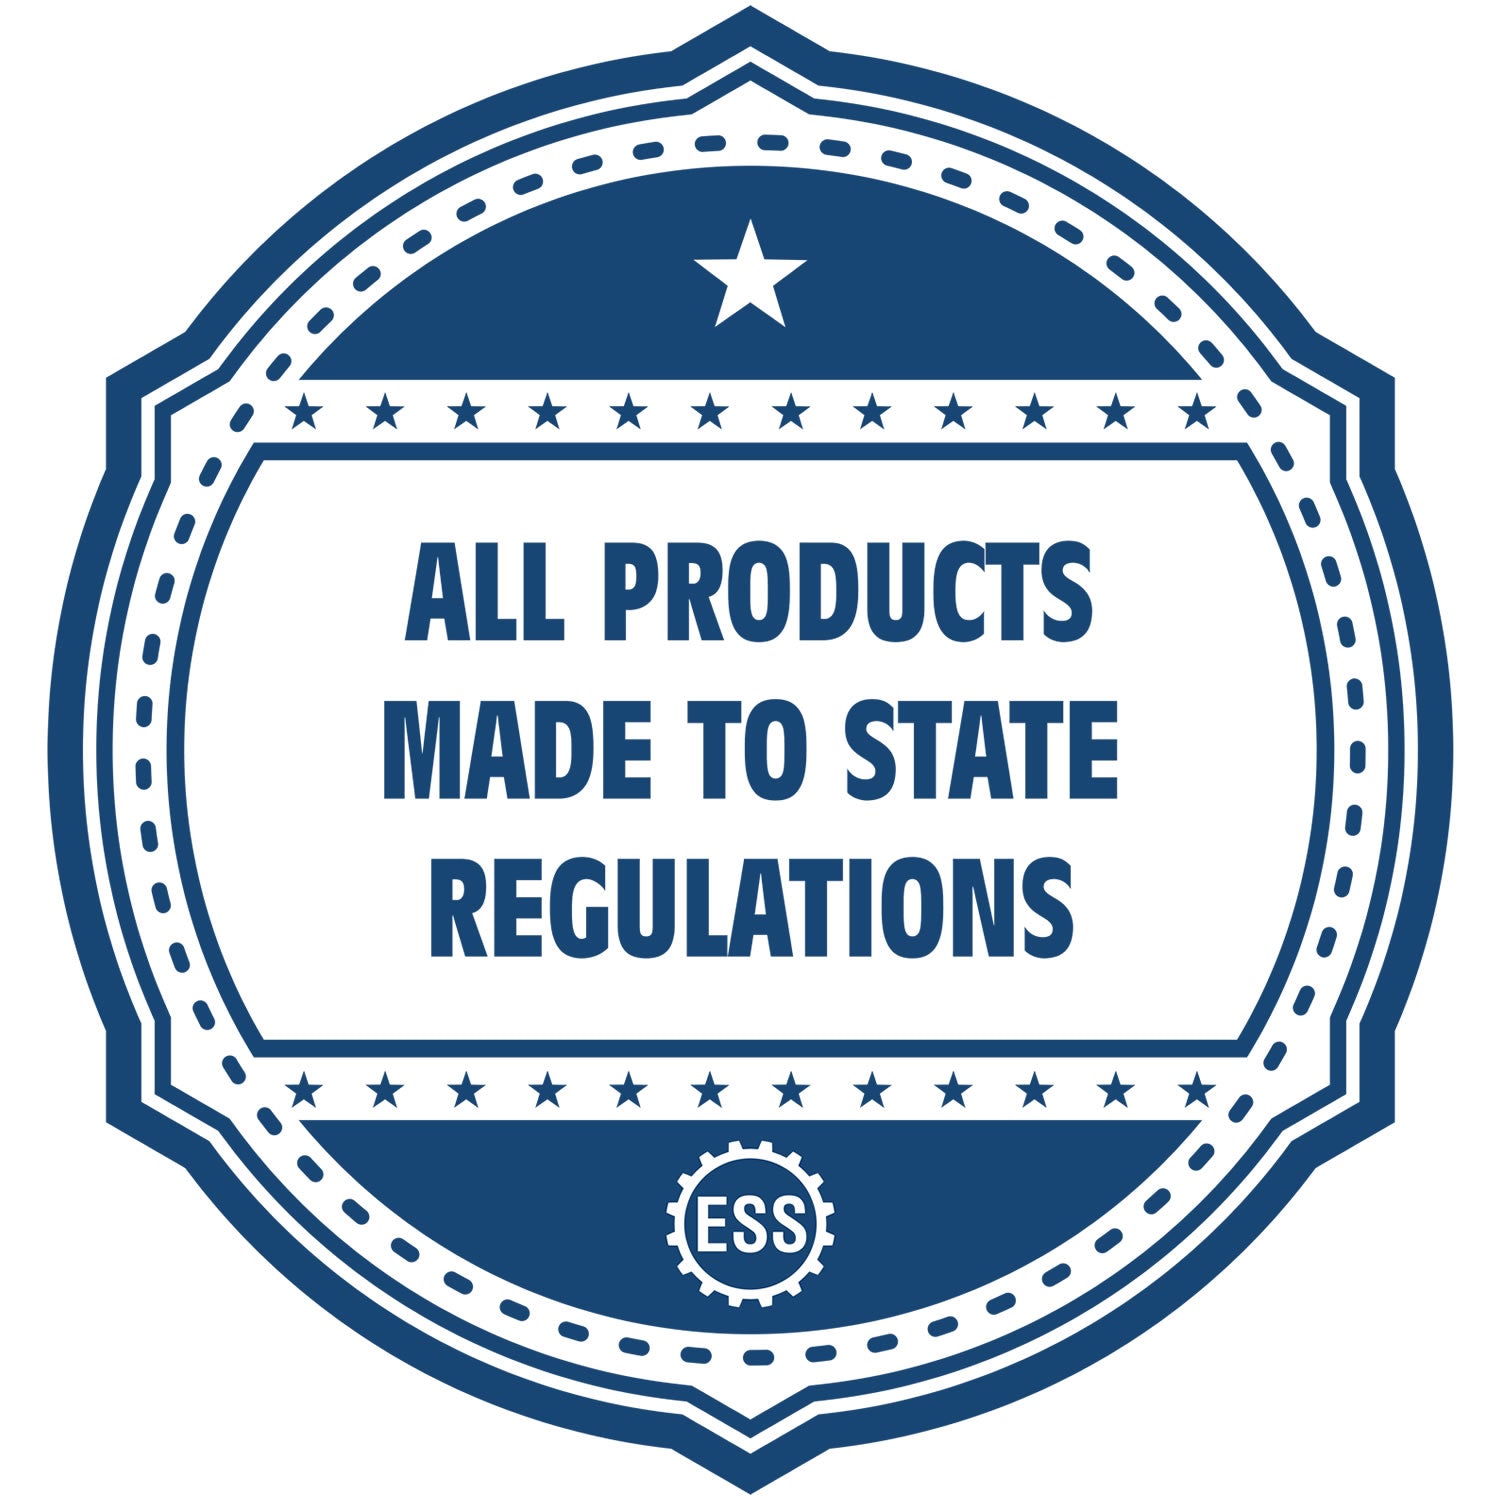 An icon or badge element for the Extended Long Reach Arkansas Architect Seal Embosser showing that this product is made in compliance with state regulations.